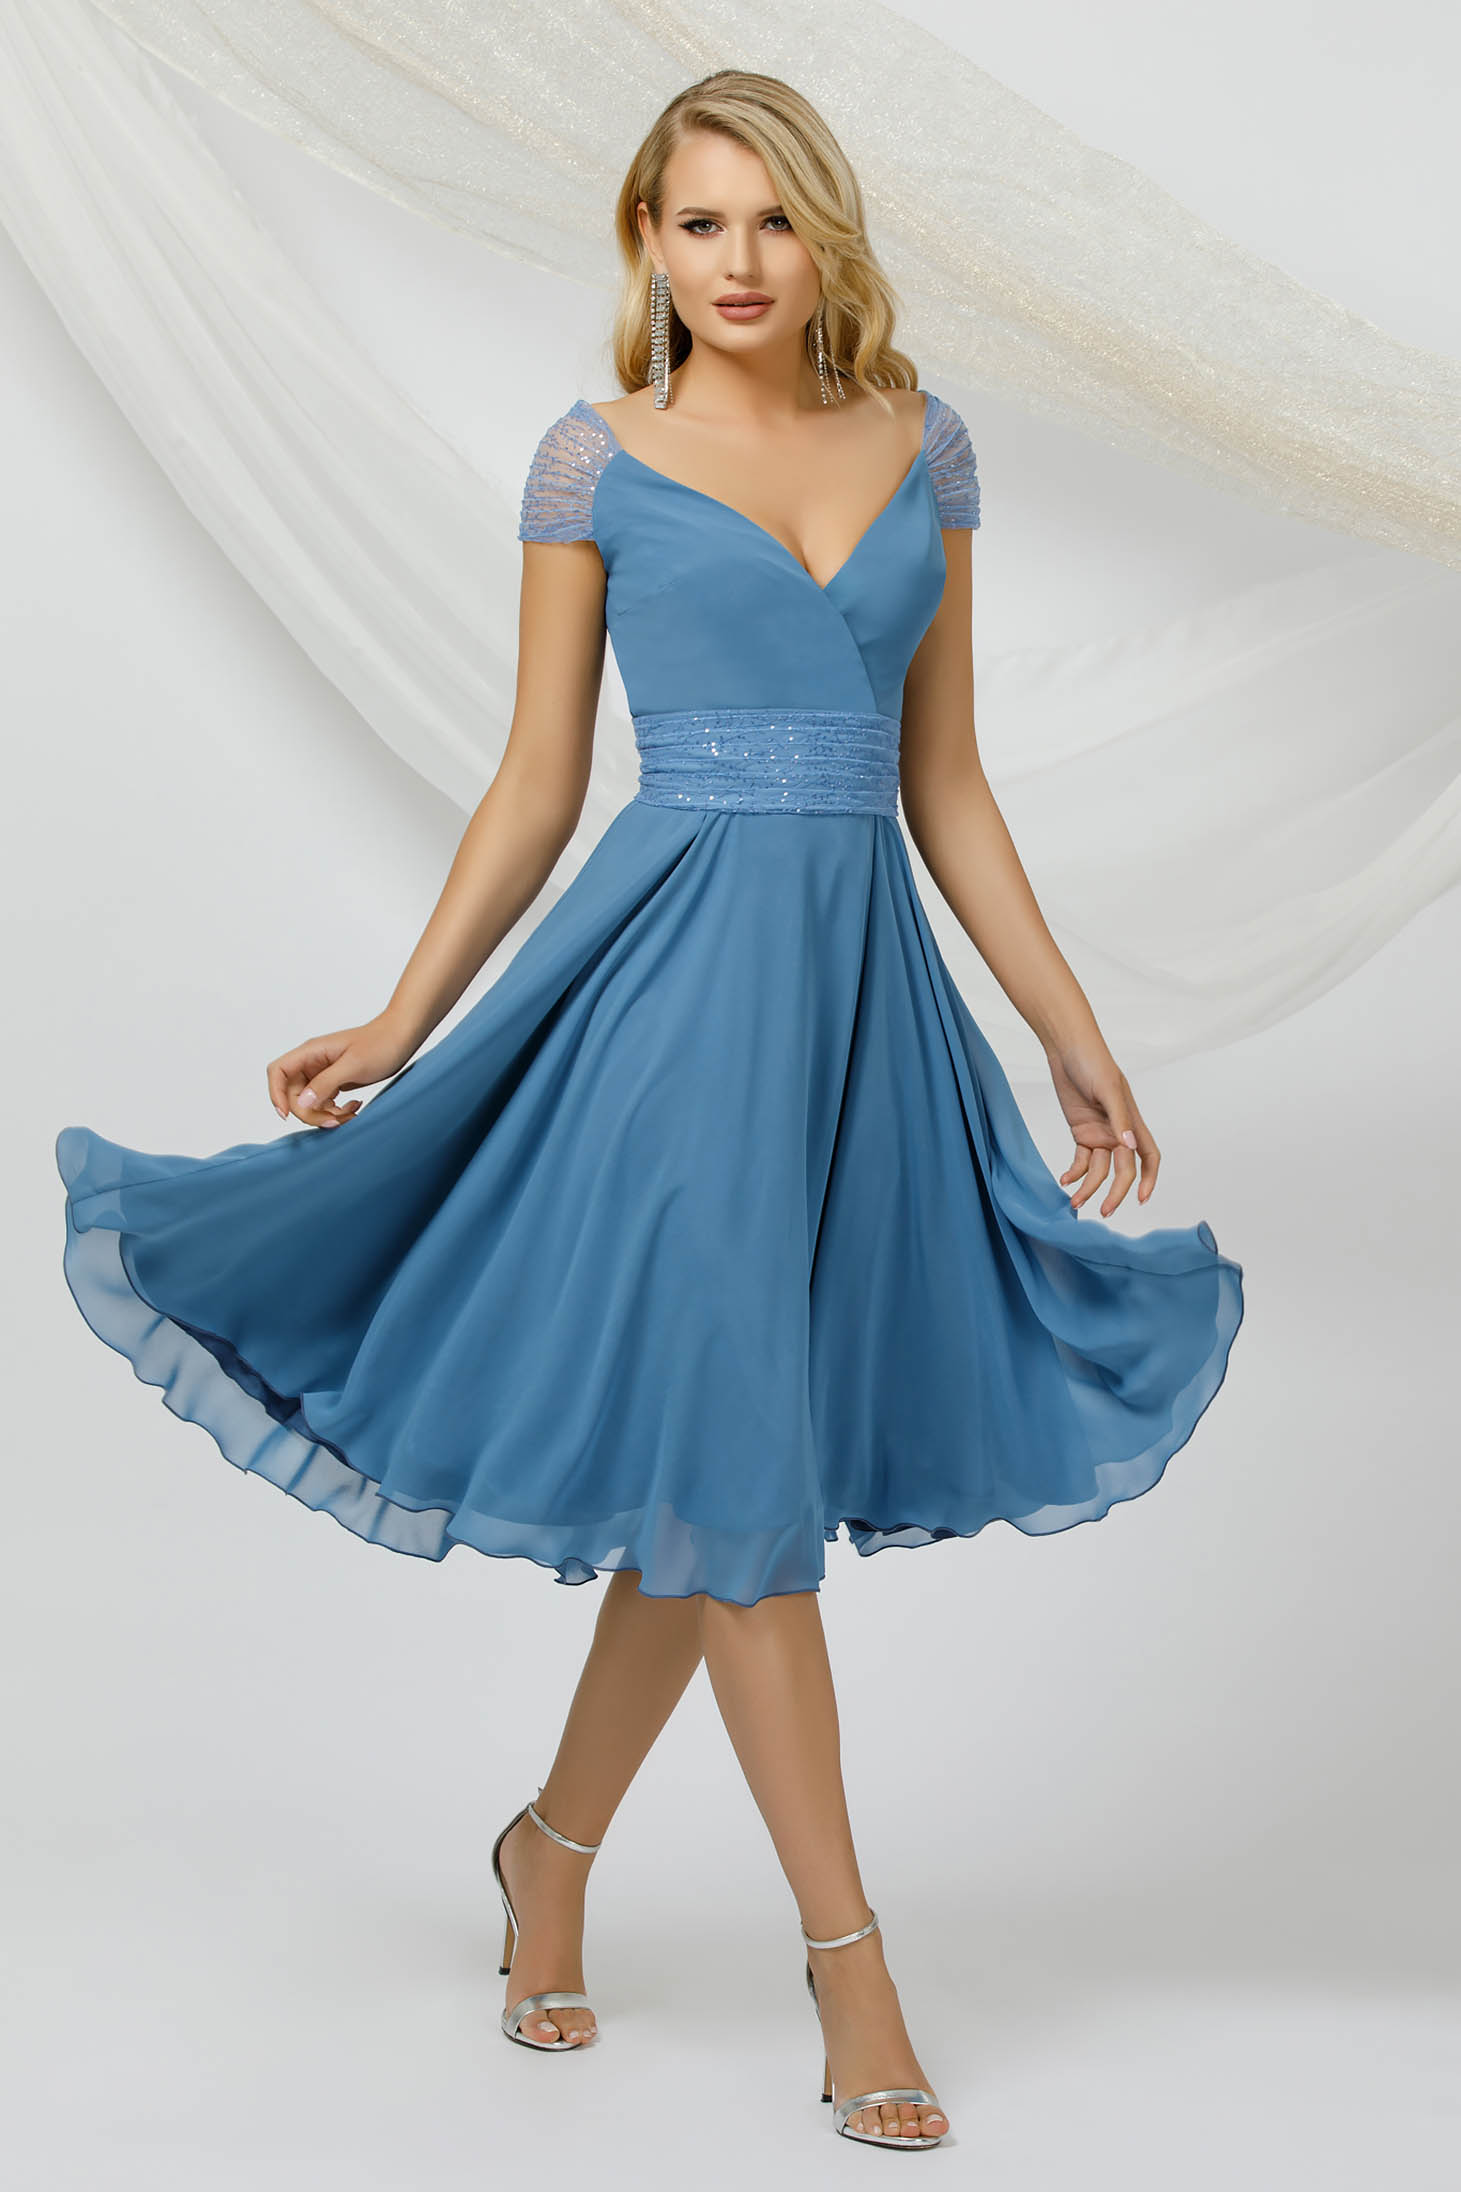 Blue dress thin fabric from veil fabric with sequin embellished details midi